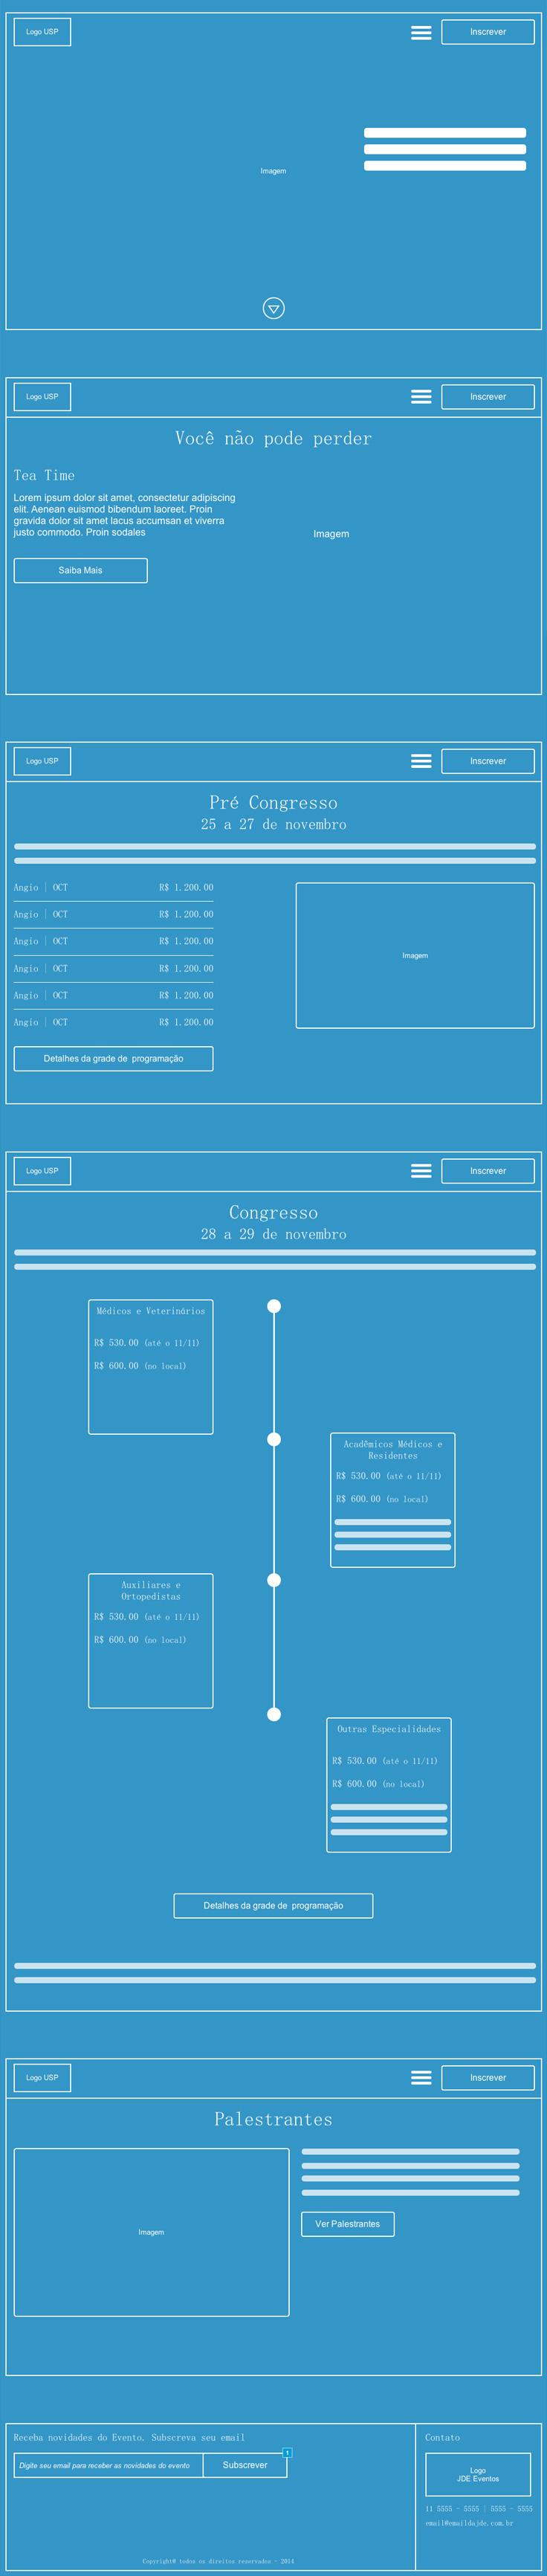 ux UI user experience design congress Event wireframe blue print axure